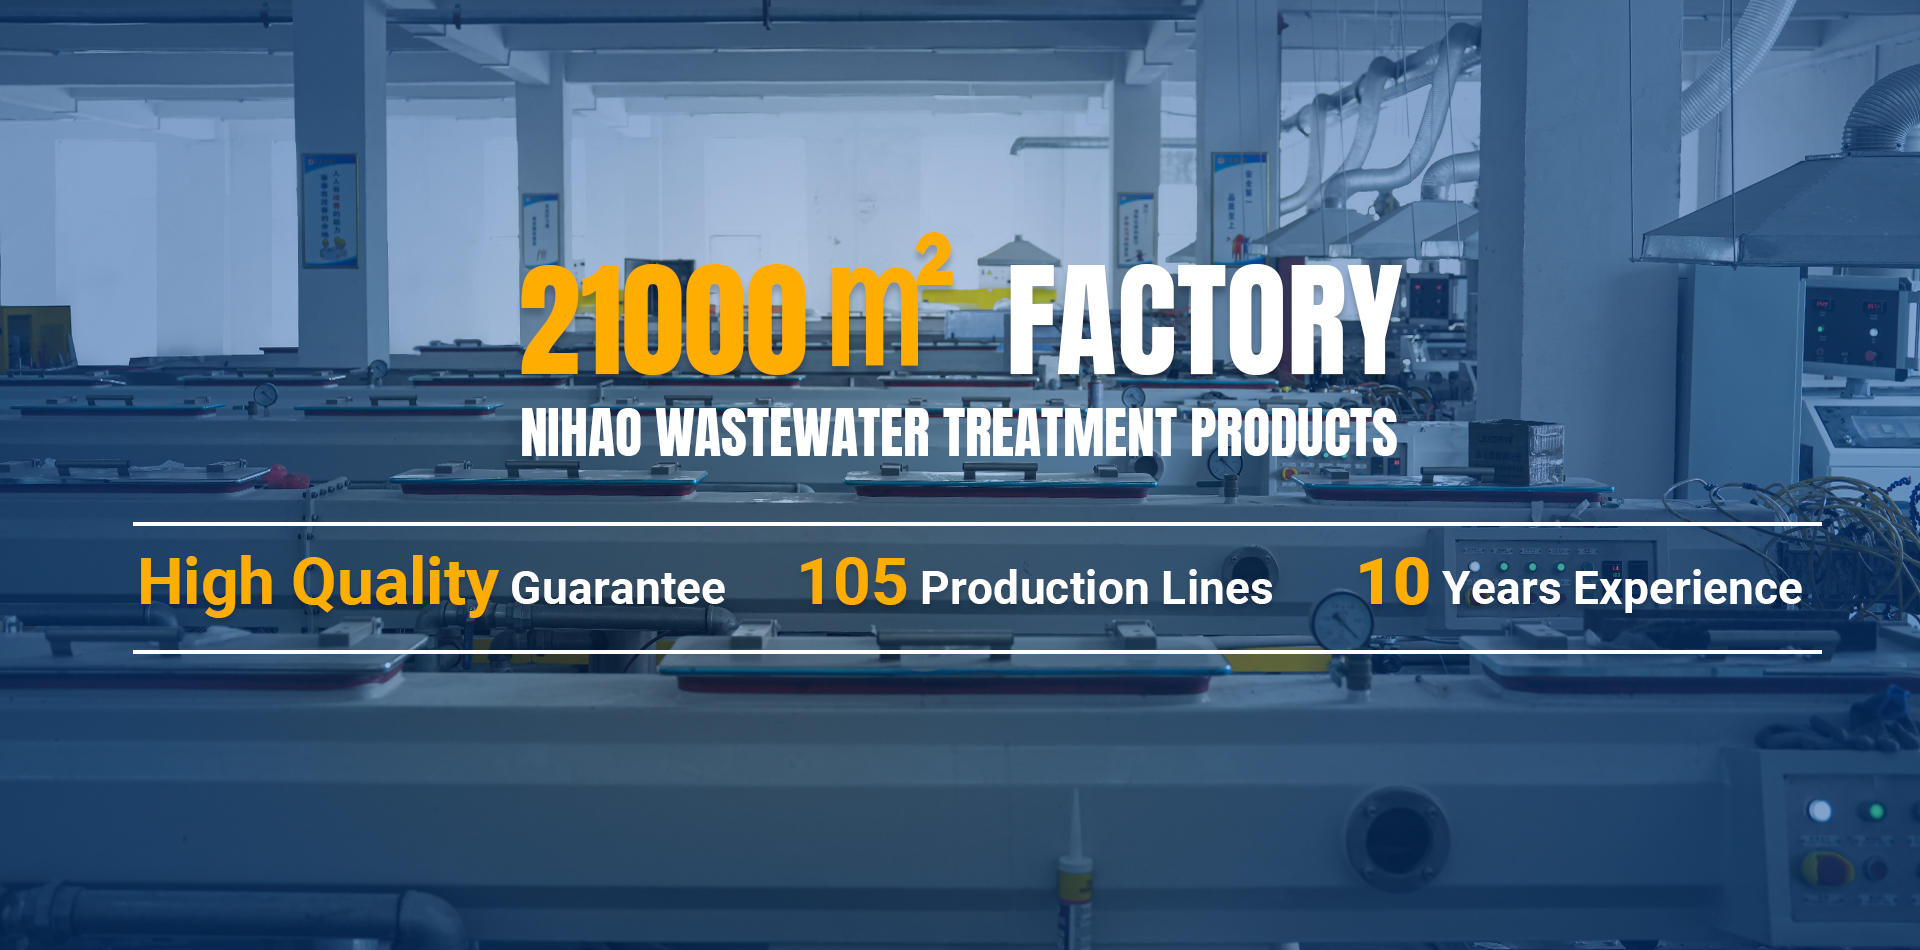 Nihao wastewater treatment products